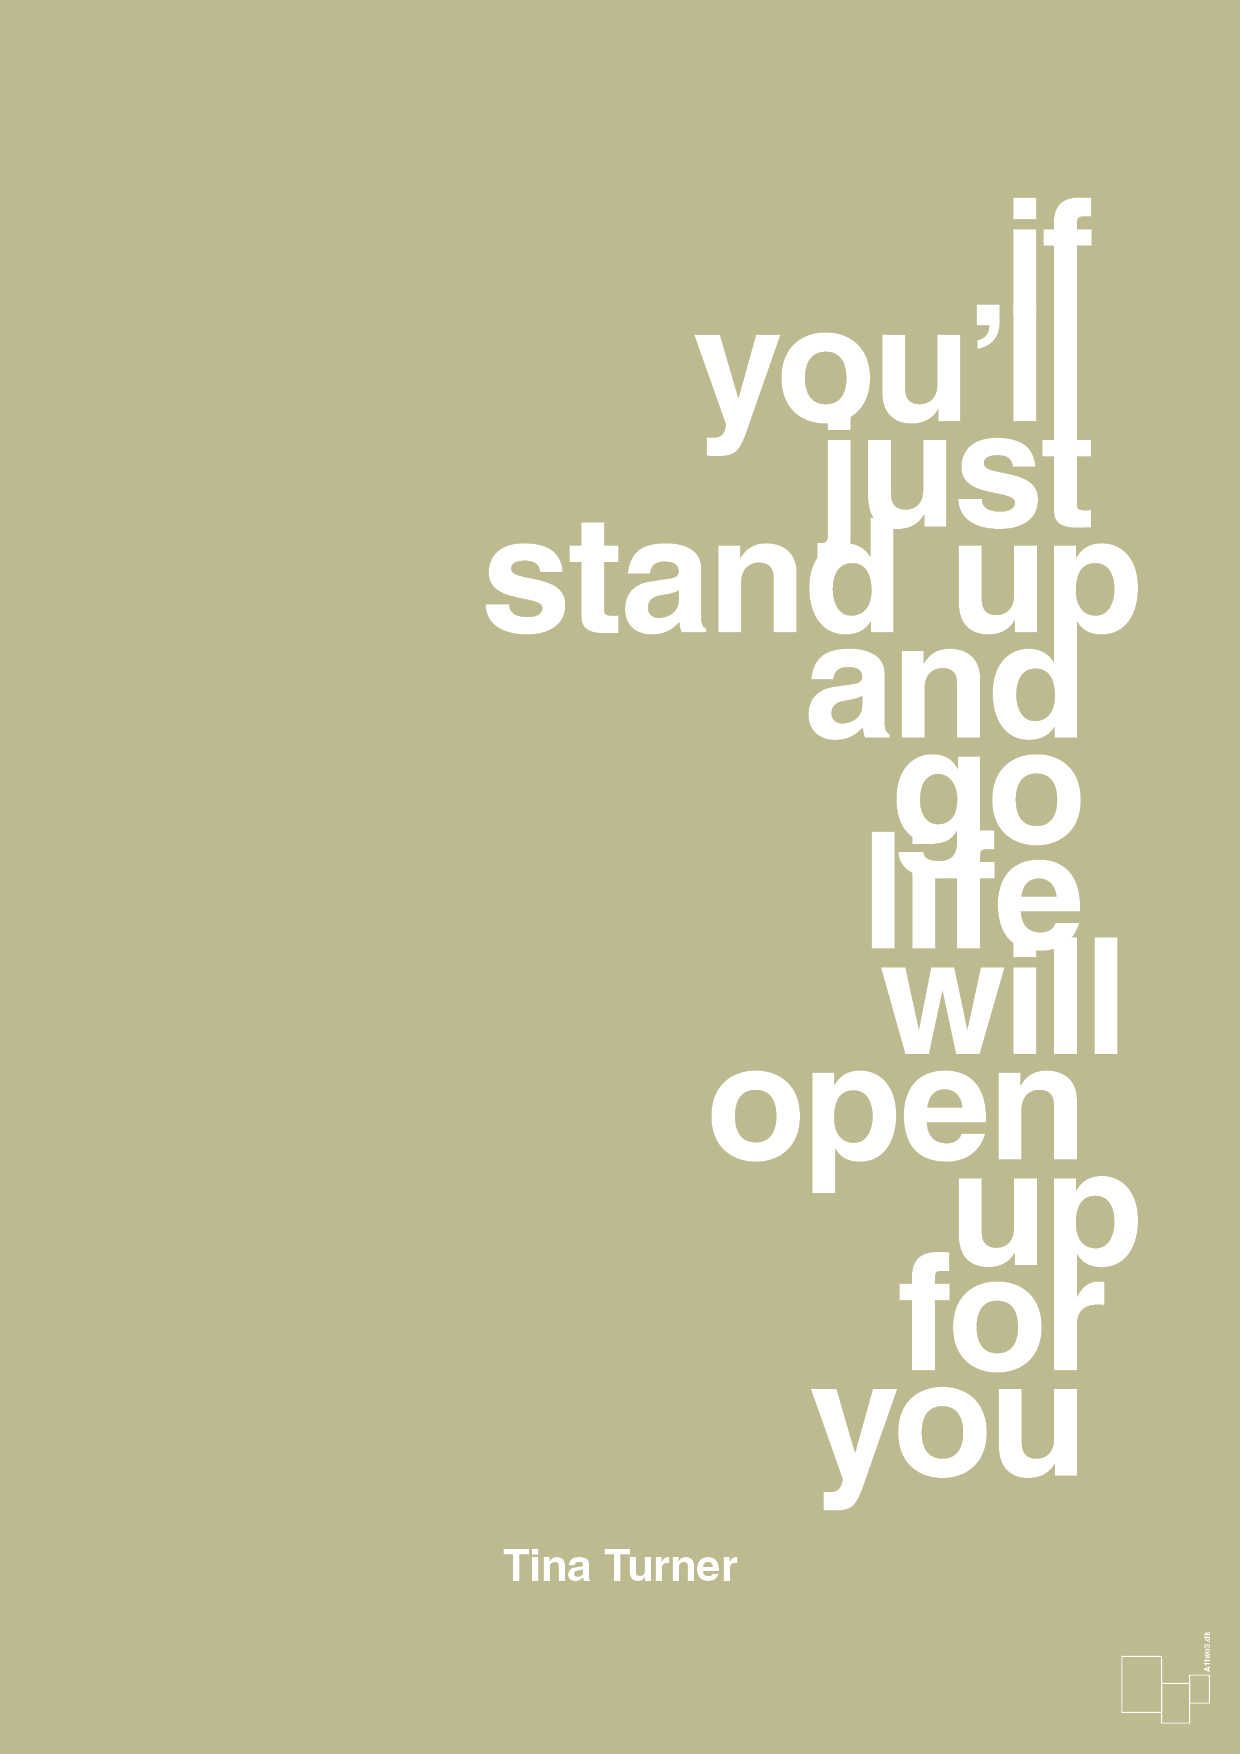 if you’ll just stand up and go life will open up for you - Plakat med Citater i Back to Nature